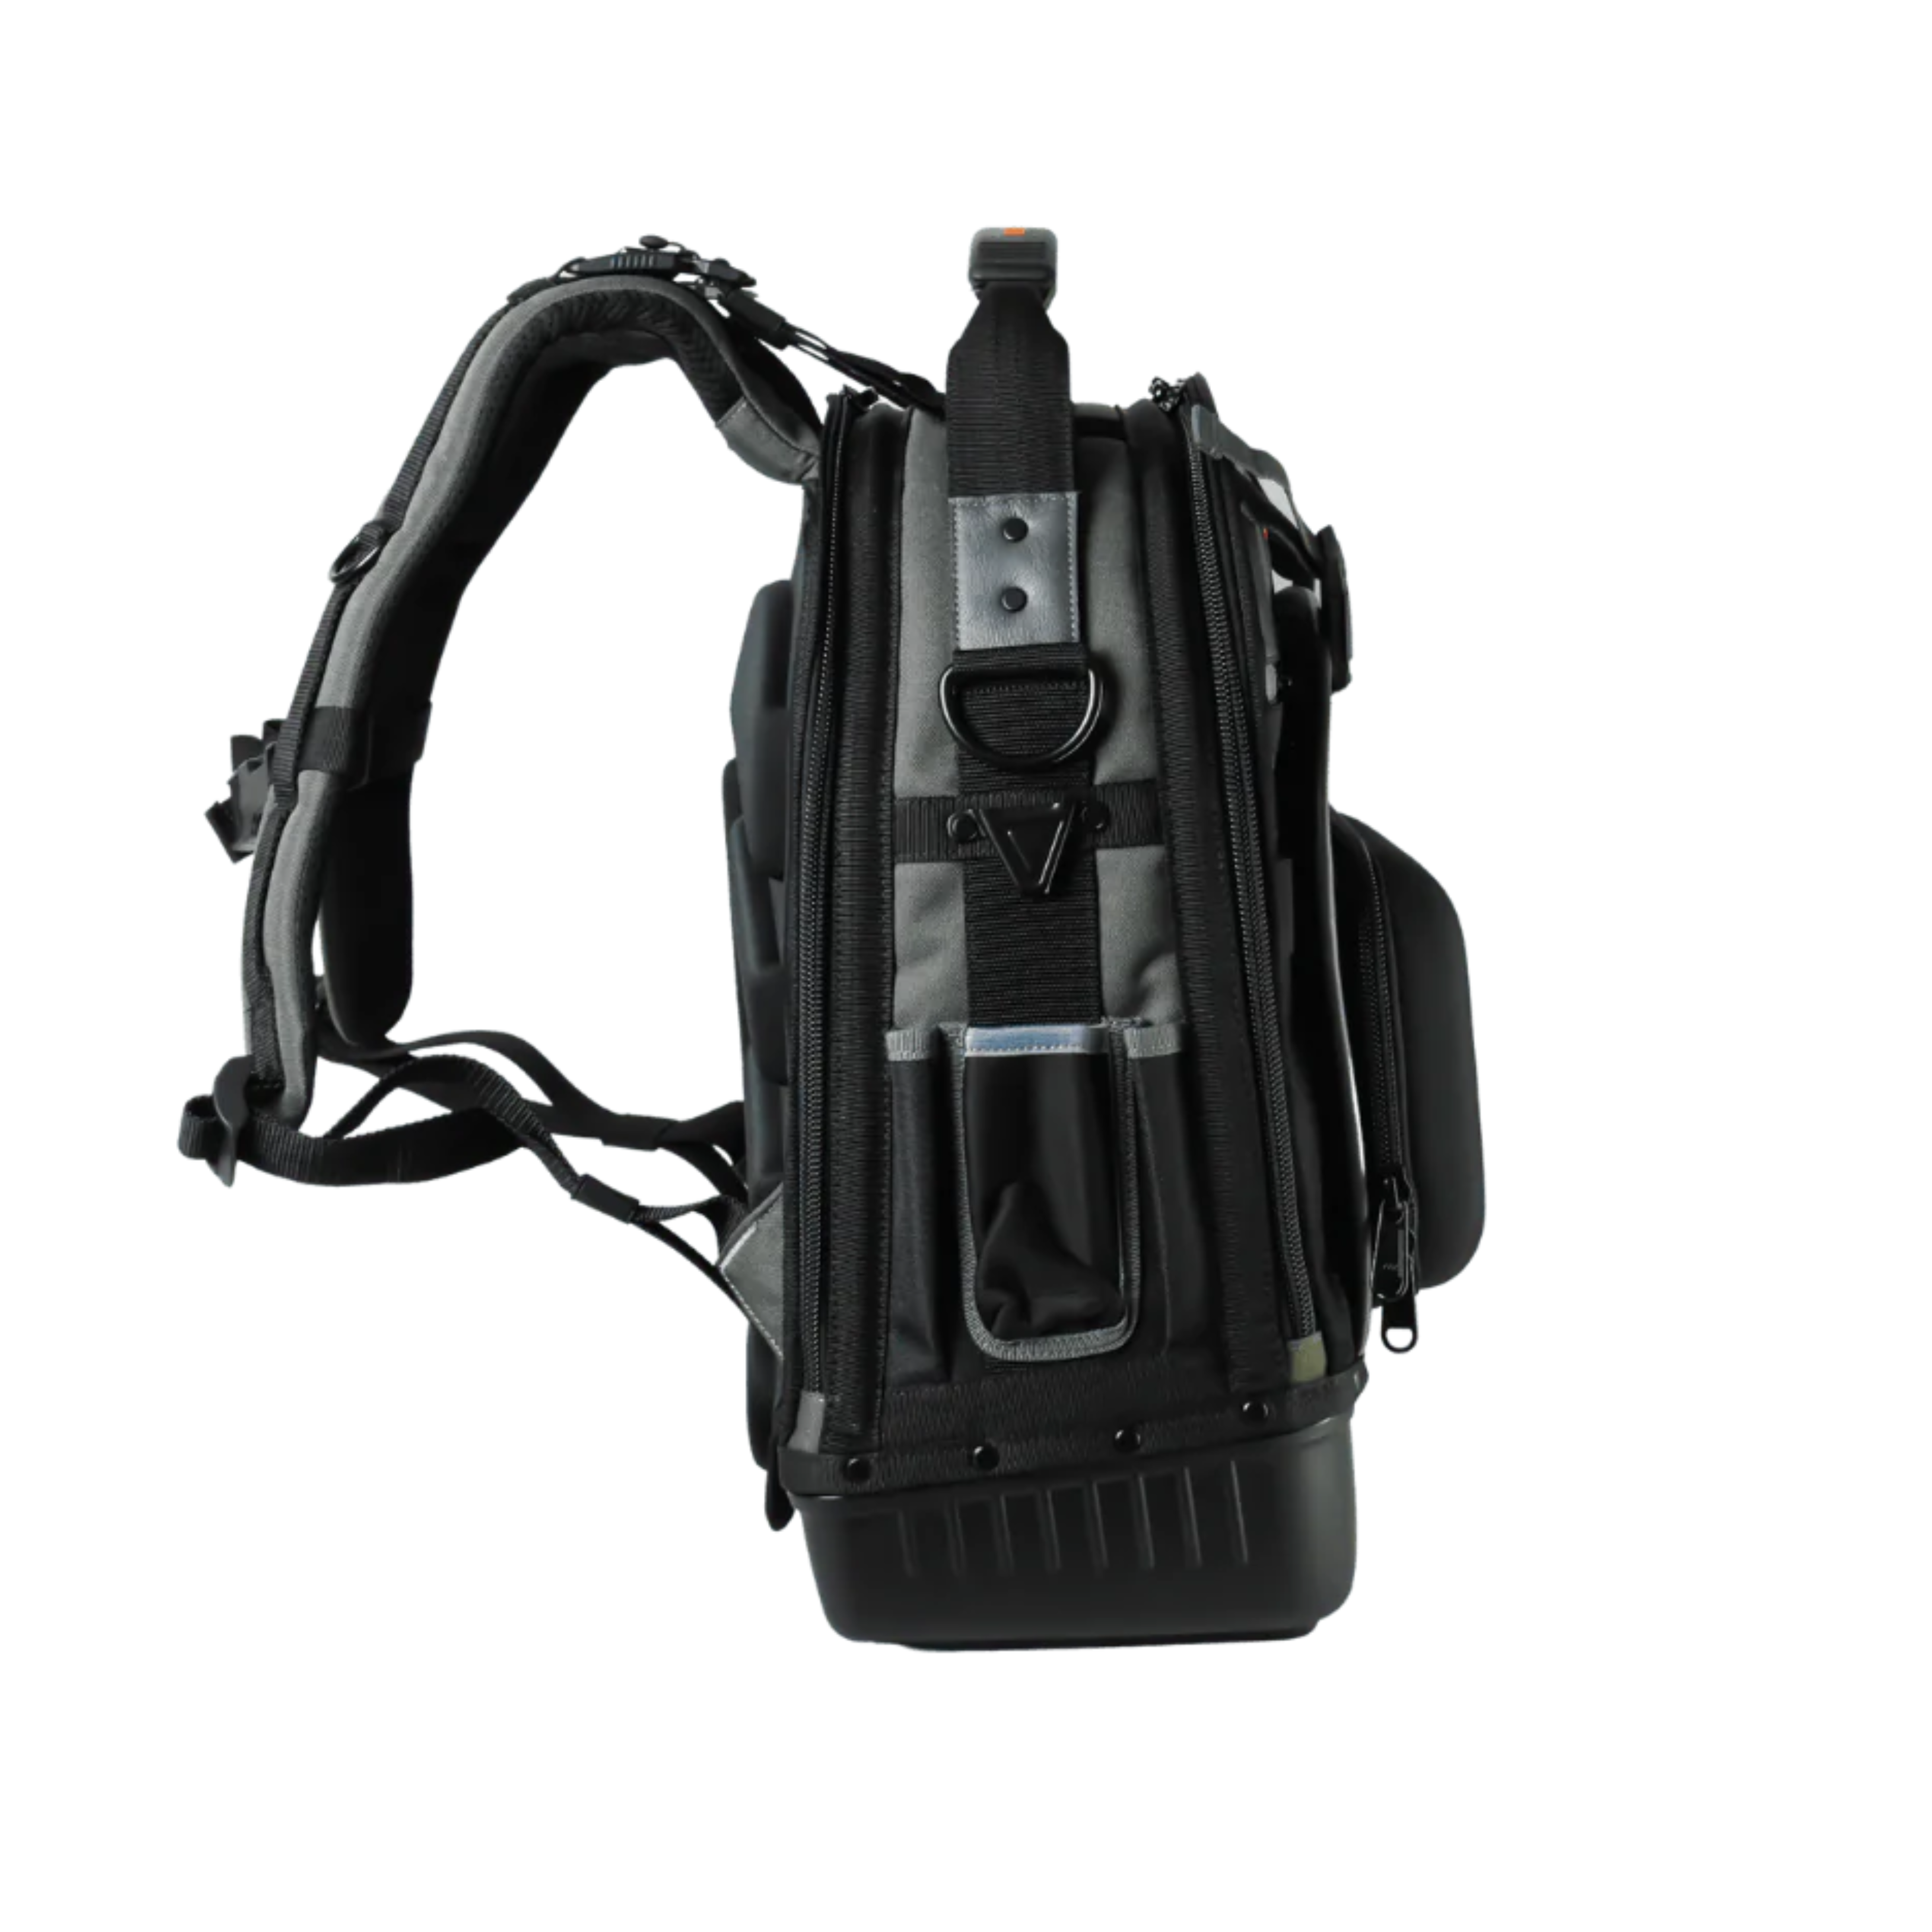 Rogue 5.0 Backpack